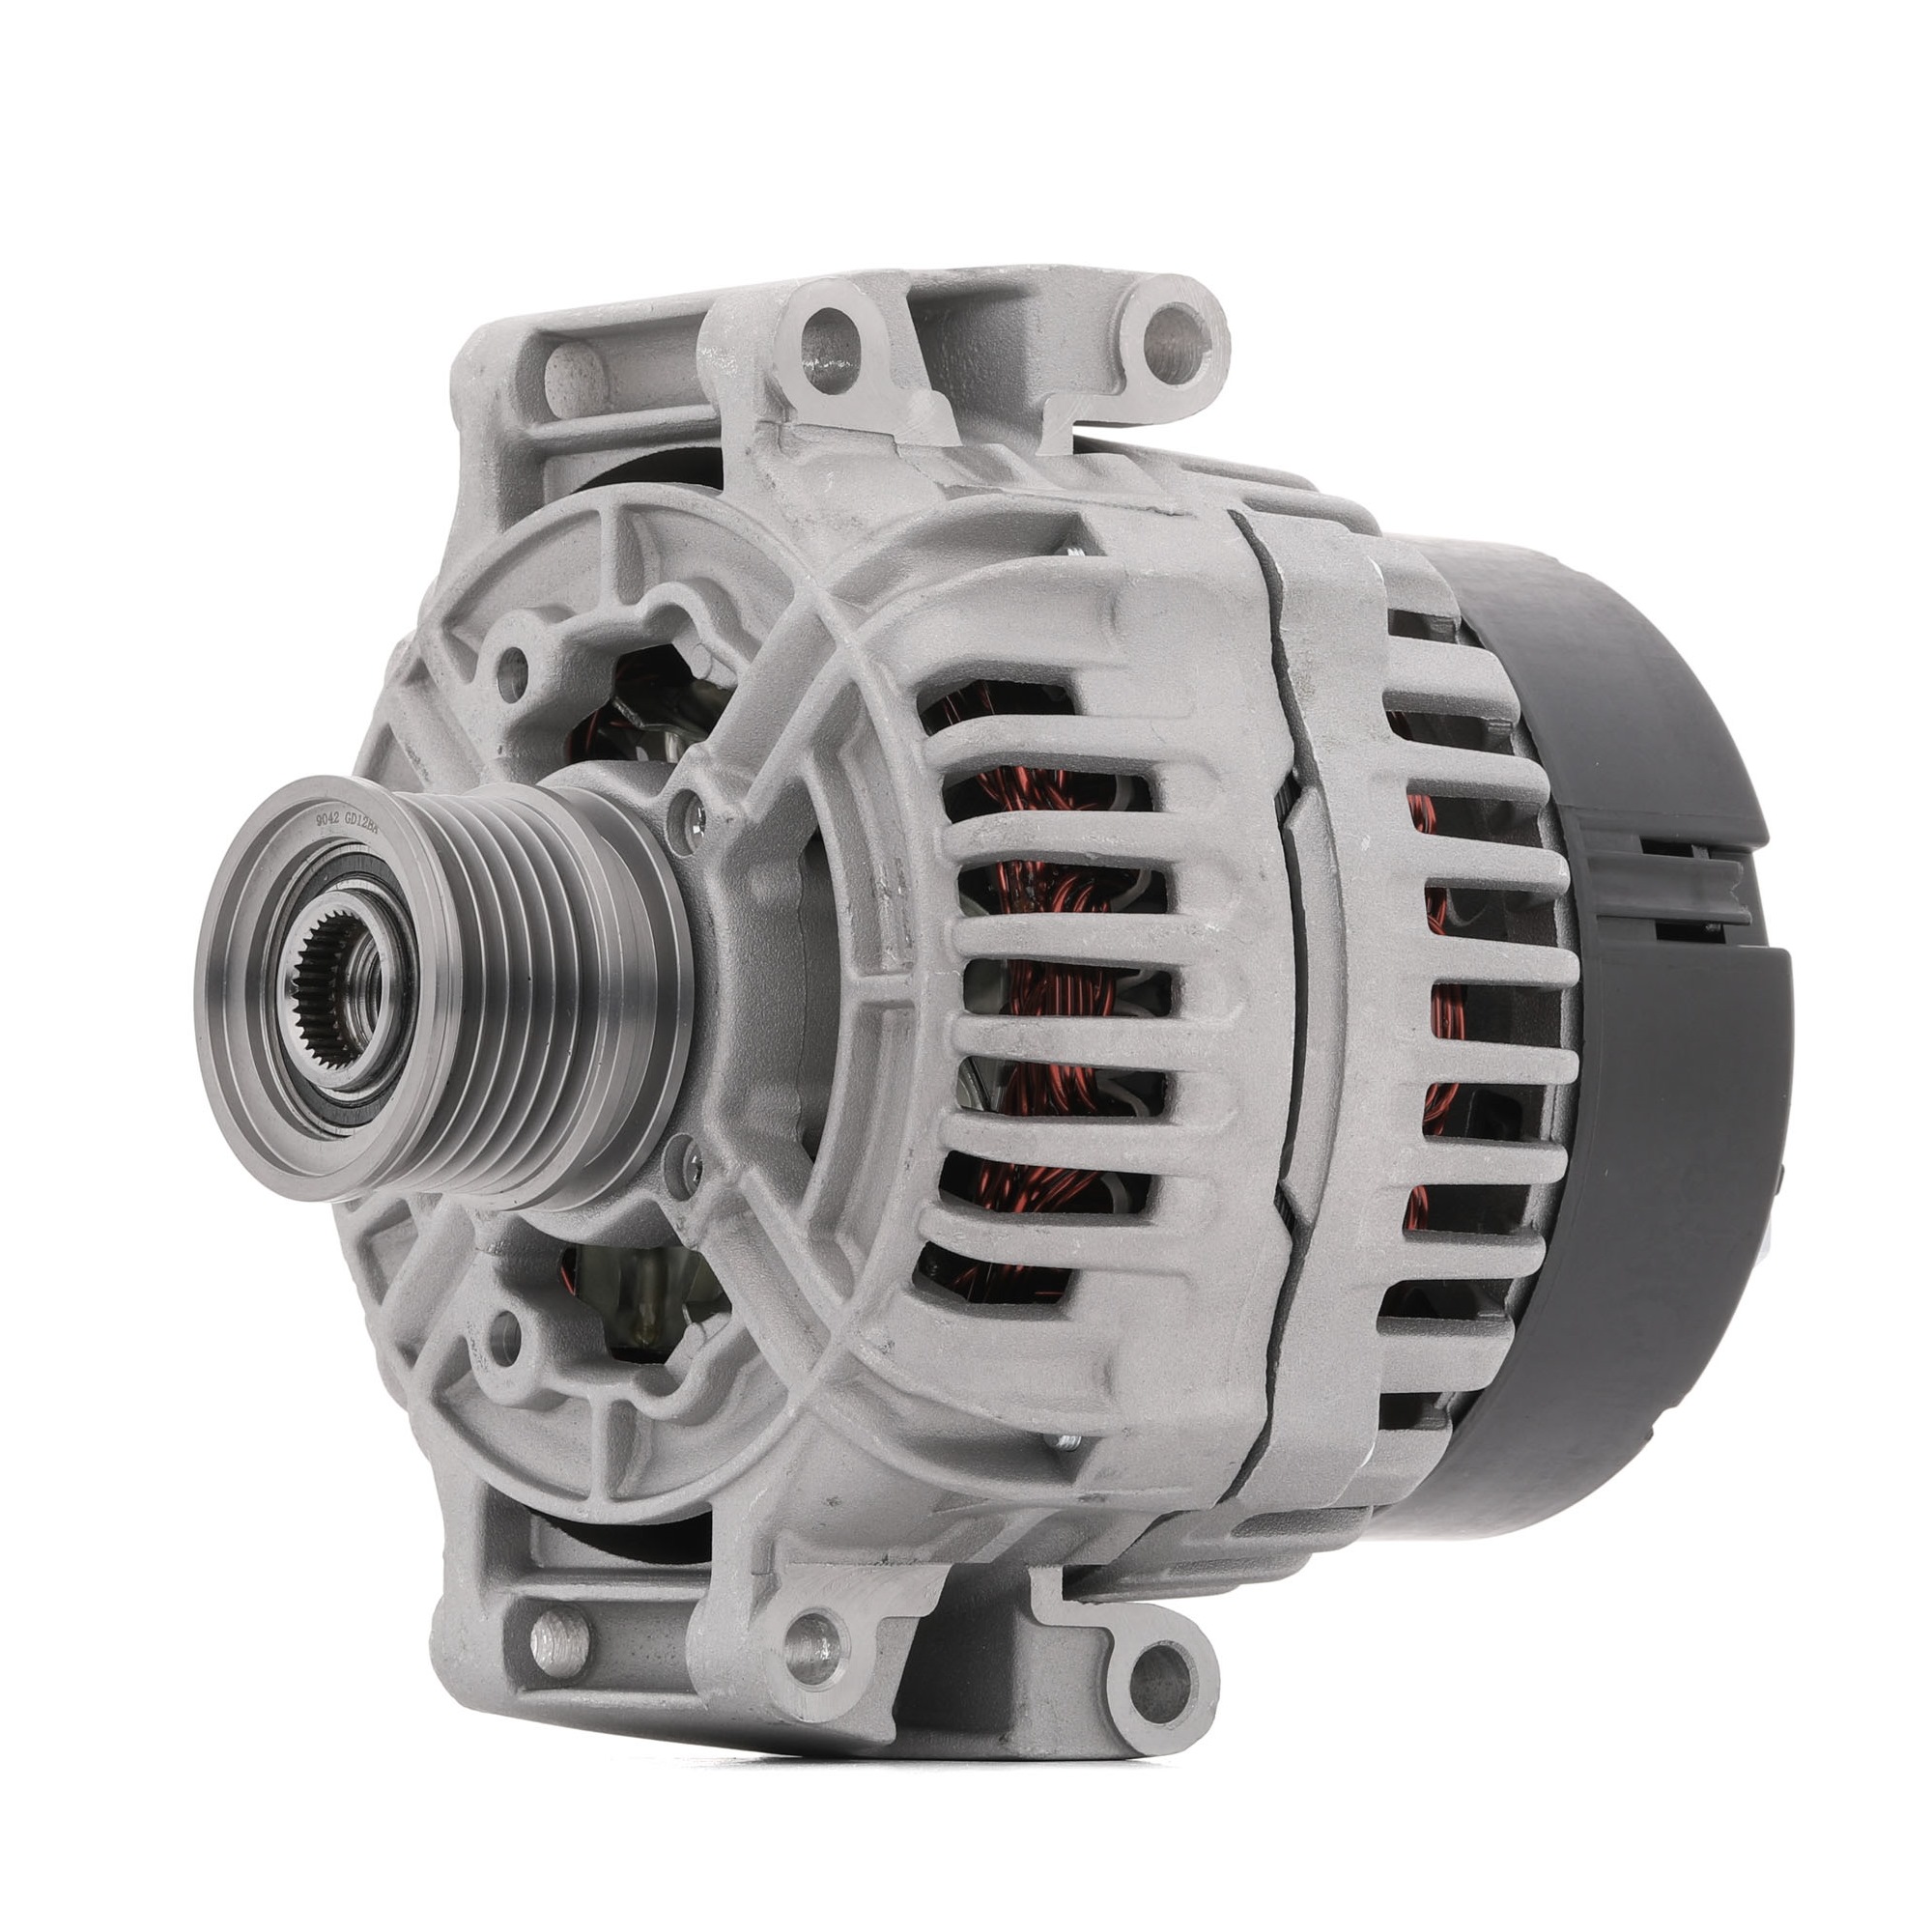 STARK 14V, 115A, excl. vacuum pump, with integrated regulator Number of ribs: 6 Generator SKGN-0320019 buy